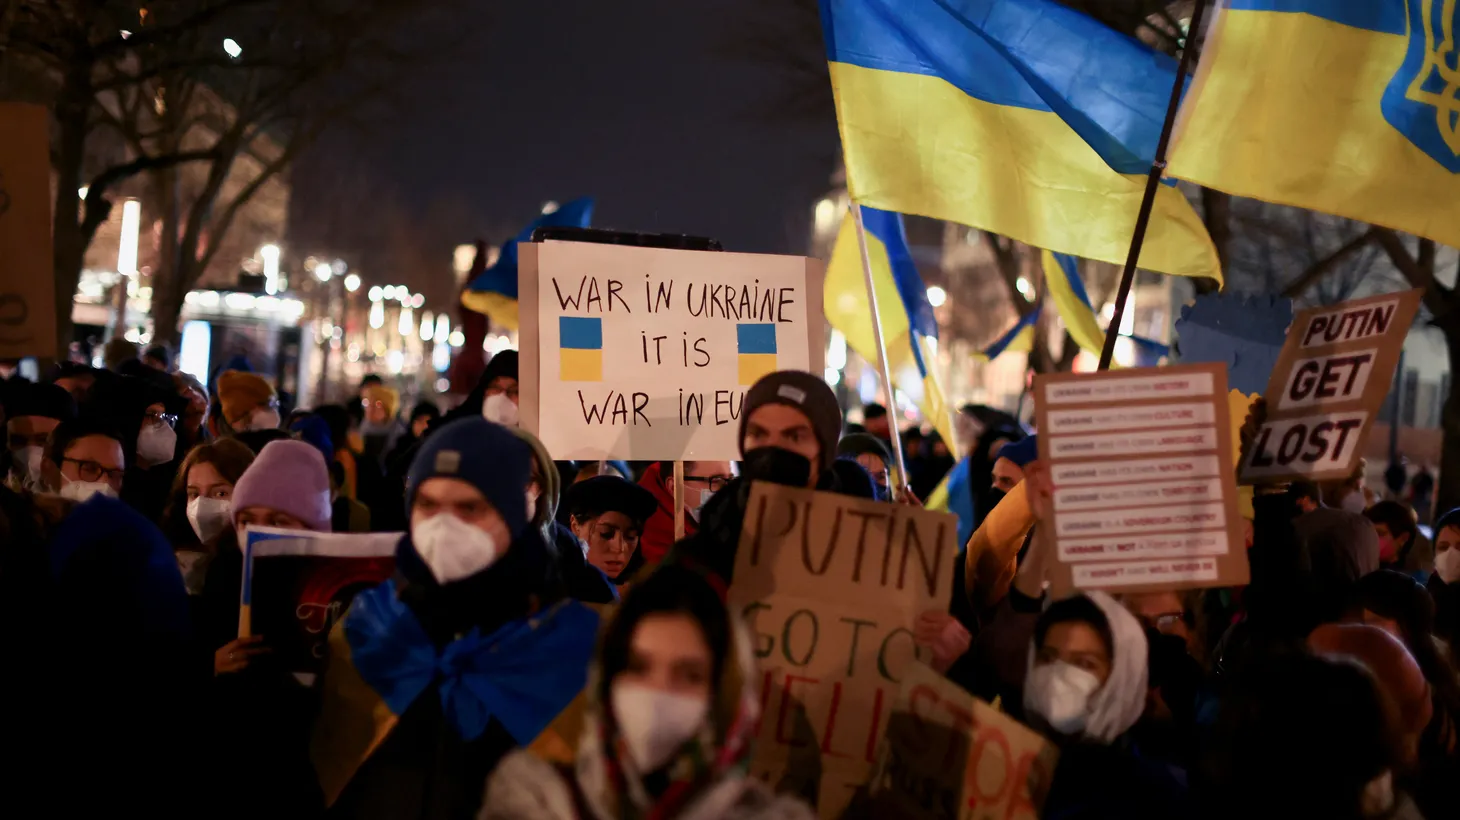 Demonstrators hold placards and wave Ukrainian flags during an anti-war protest in front of the Russian embassy in Berlin, Germany, February 22, 2022.